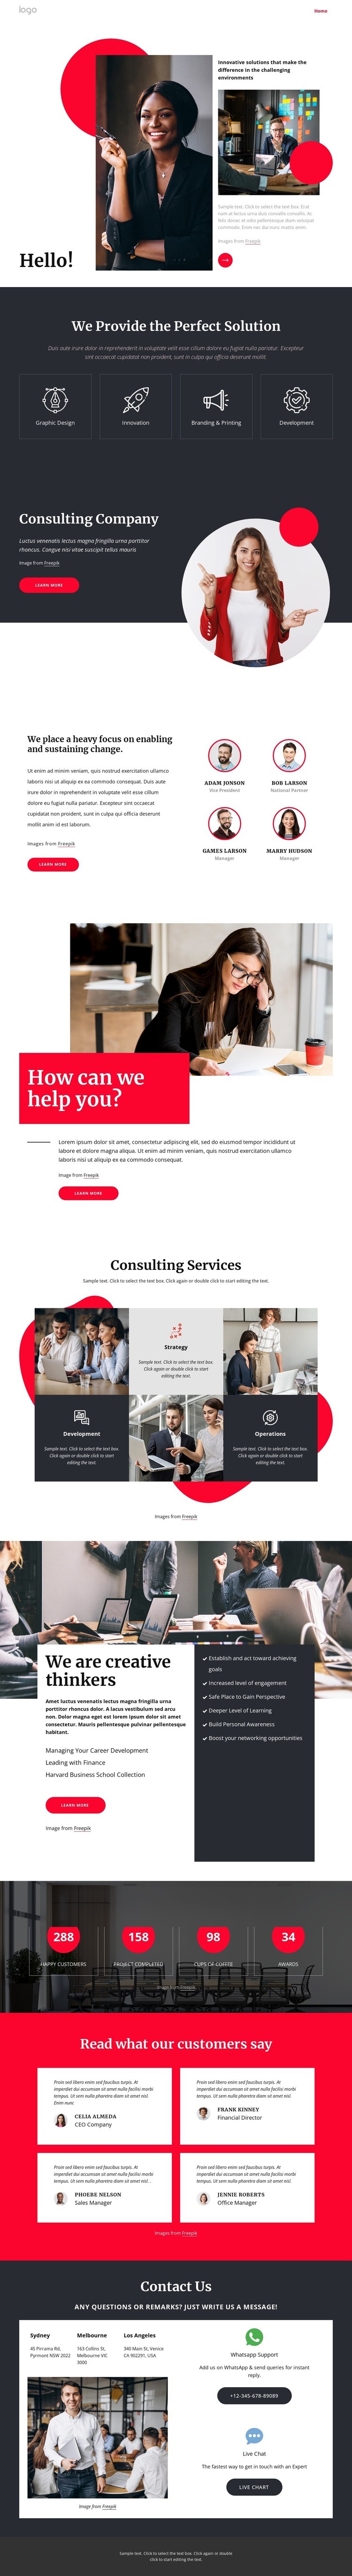 Consulting company NYC Web Page Design